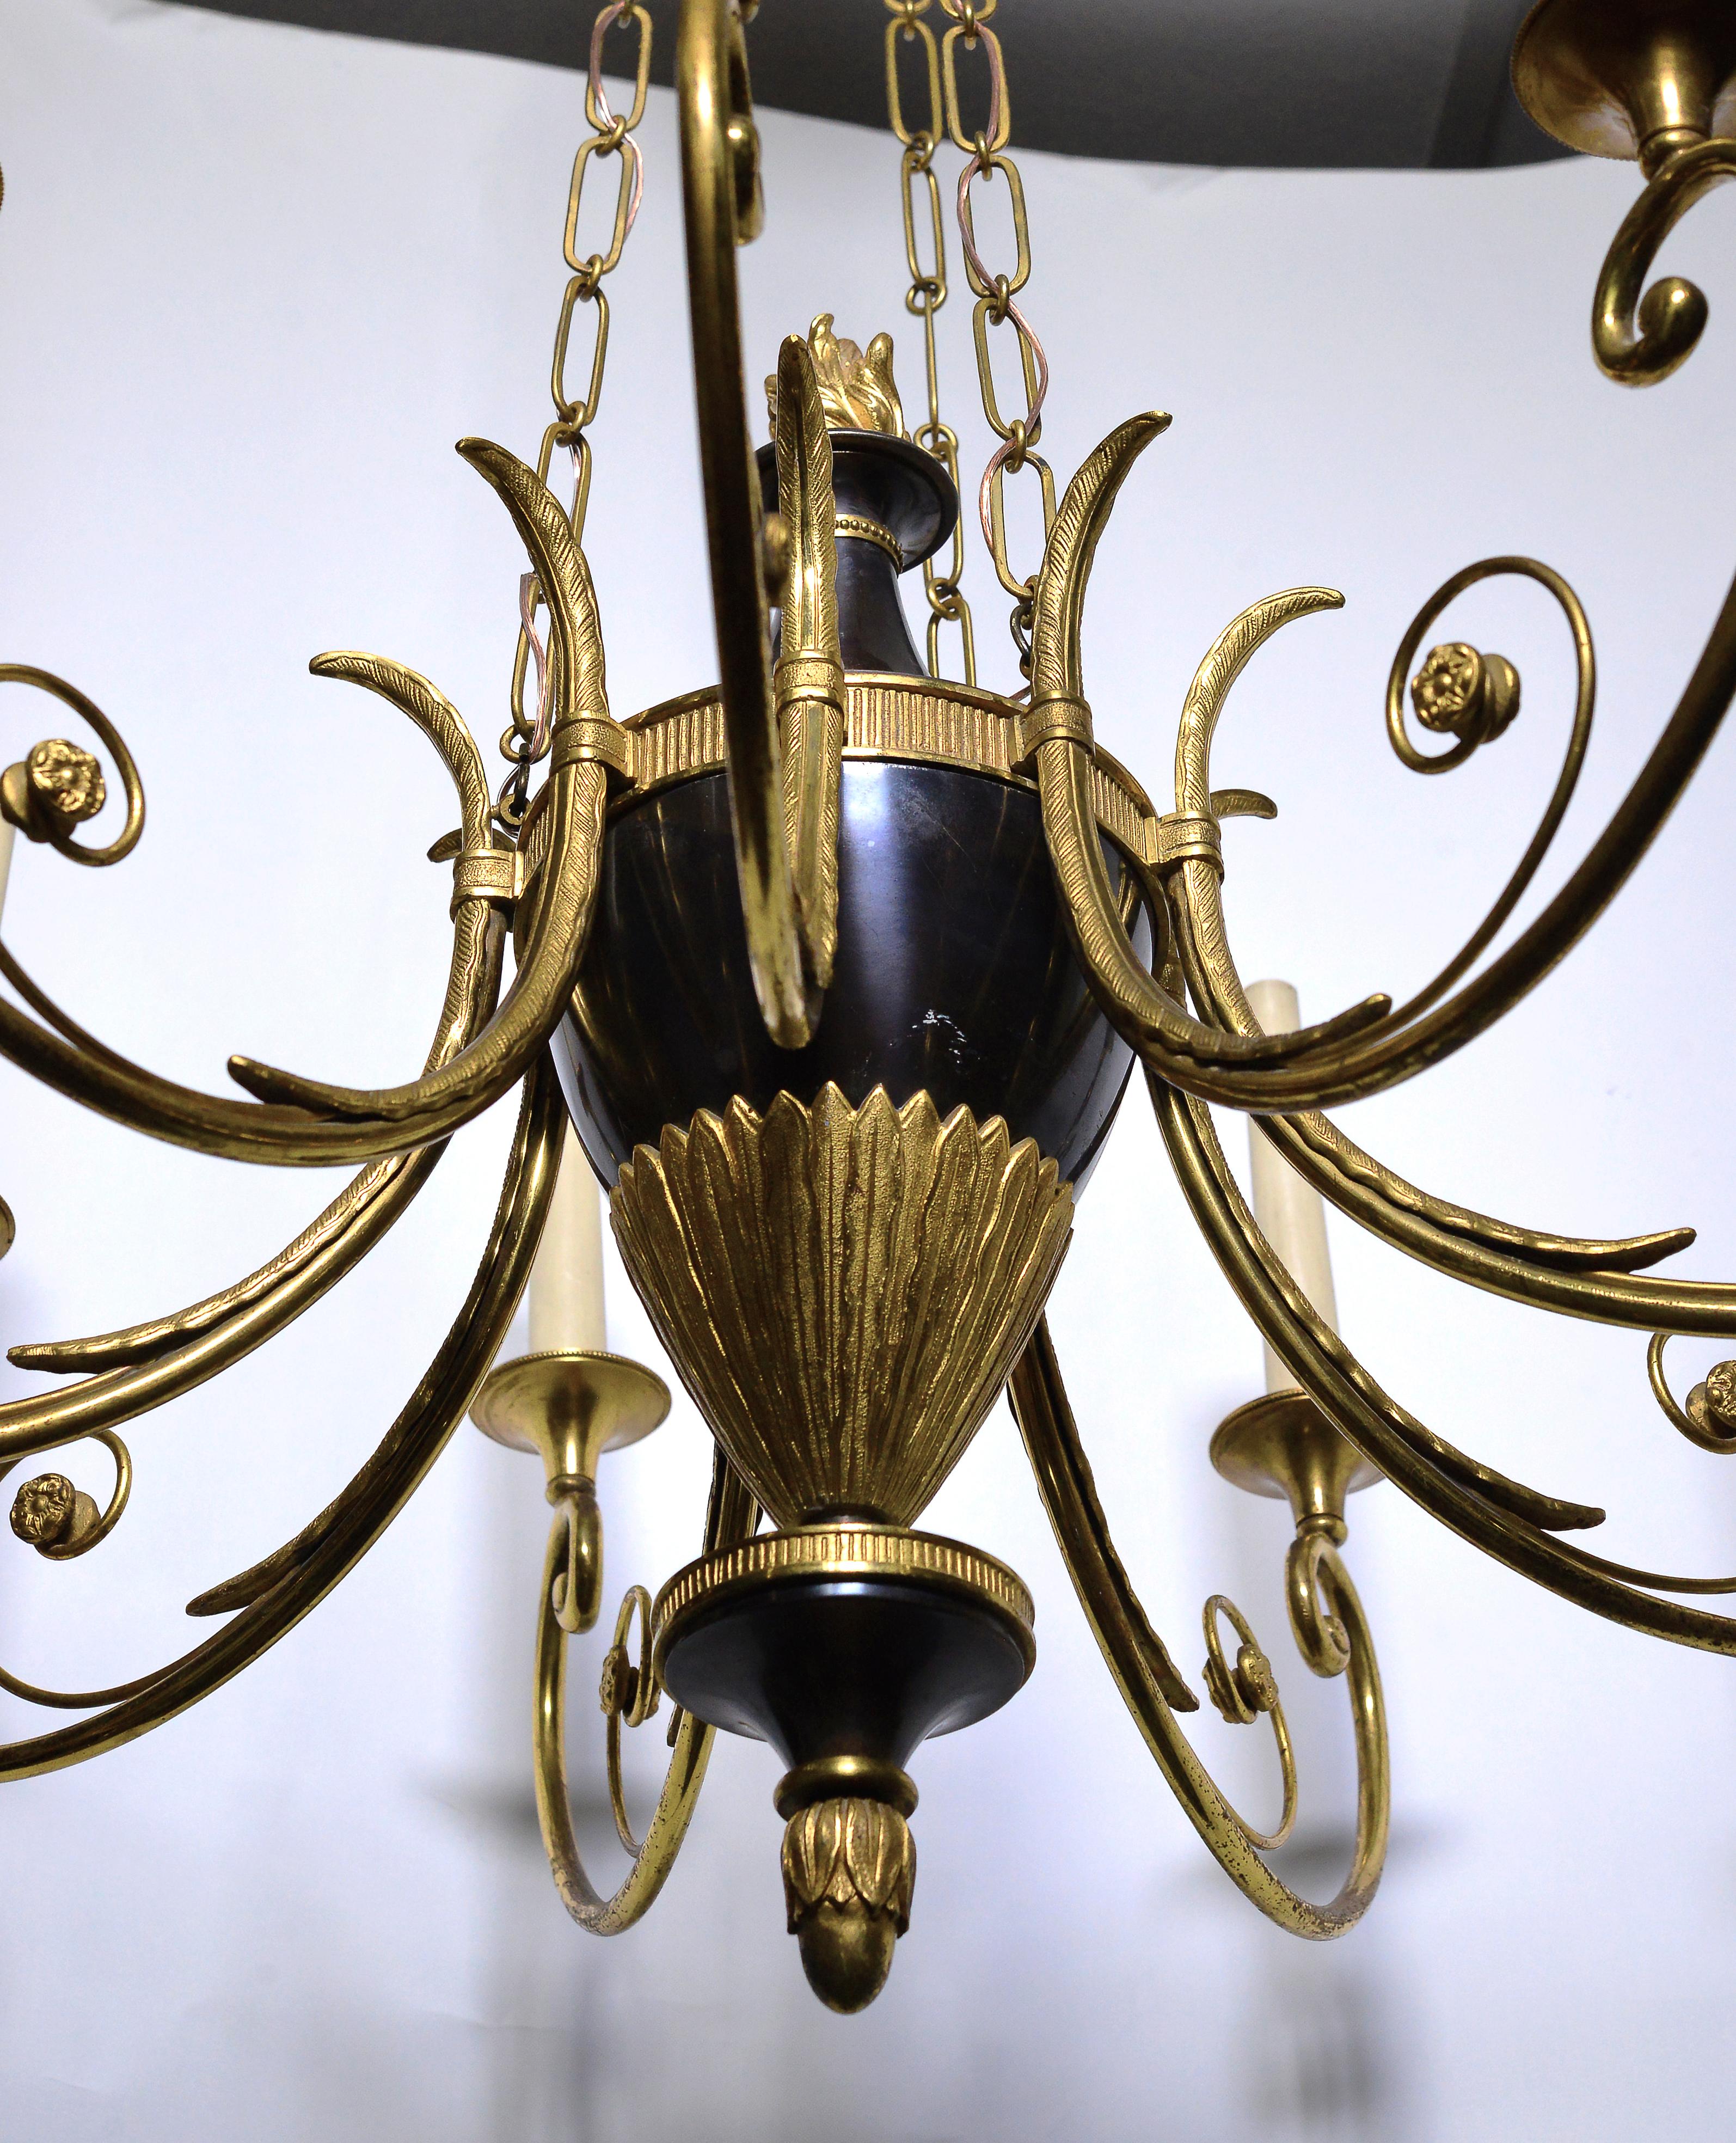 Metal Empire Antique Chandelier Gilt Bronze and Oxidized 9 light early 20th century For Sale